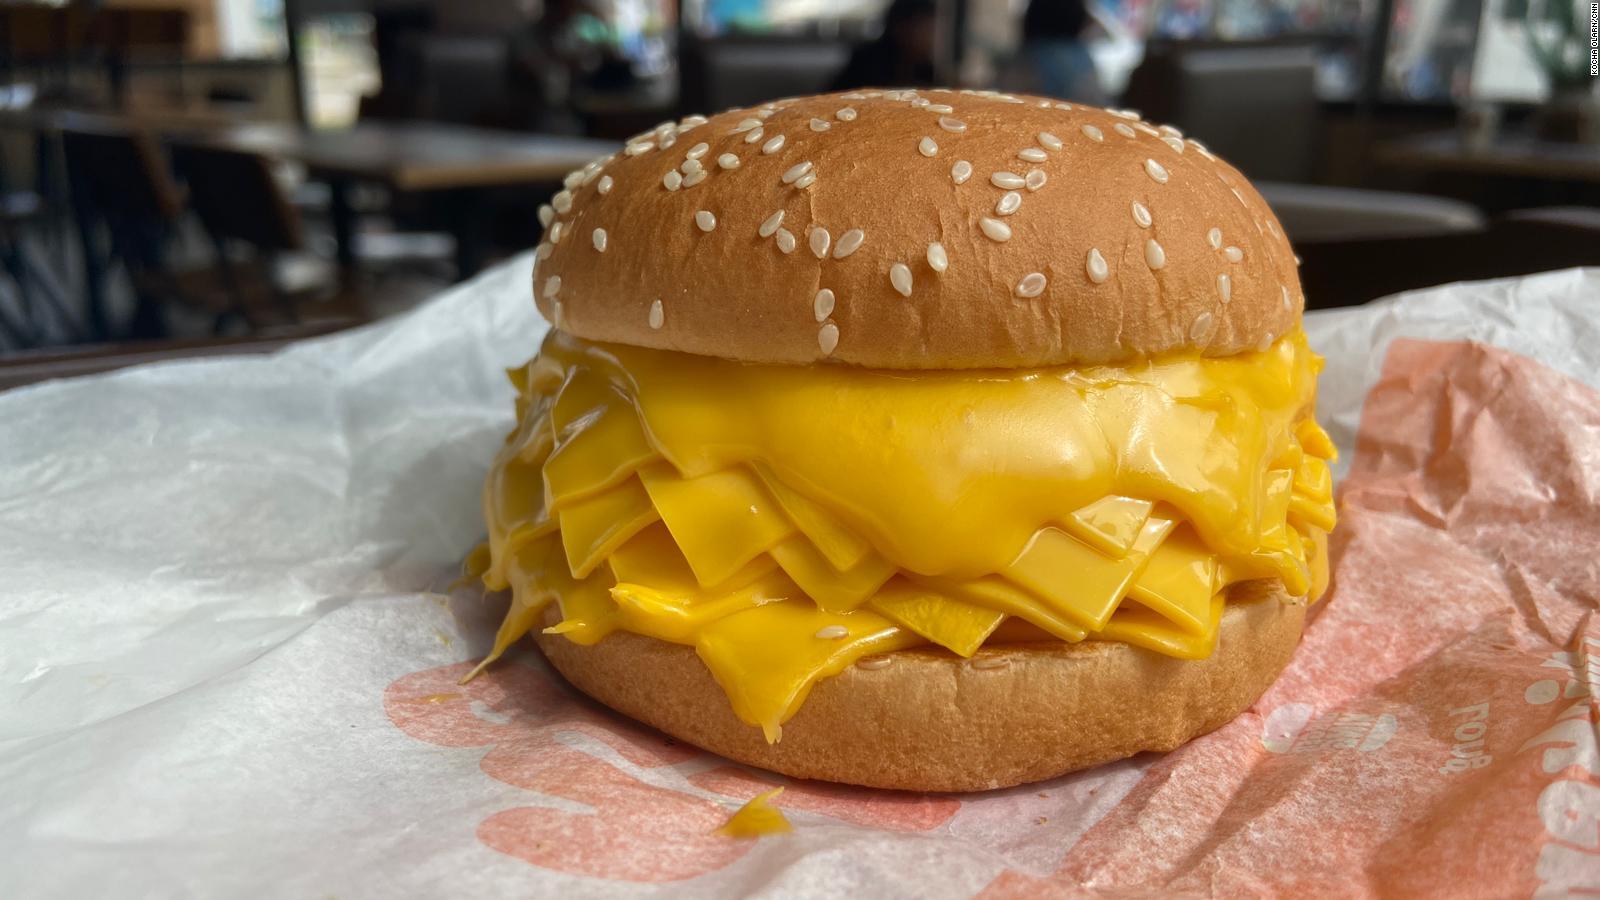 Burger King releases the "real cheeseburger" CNN Video